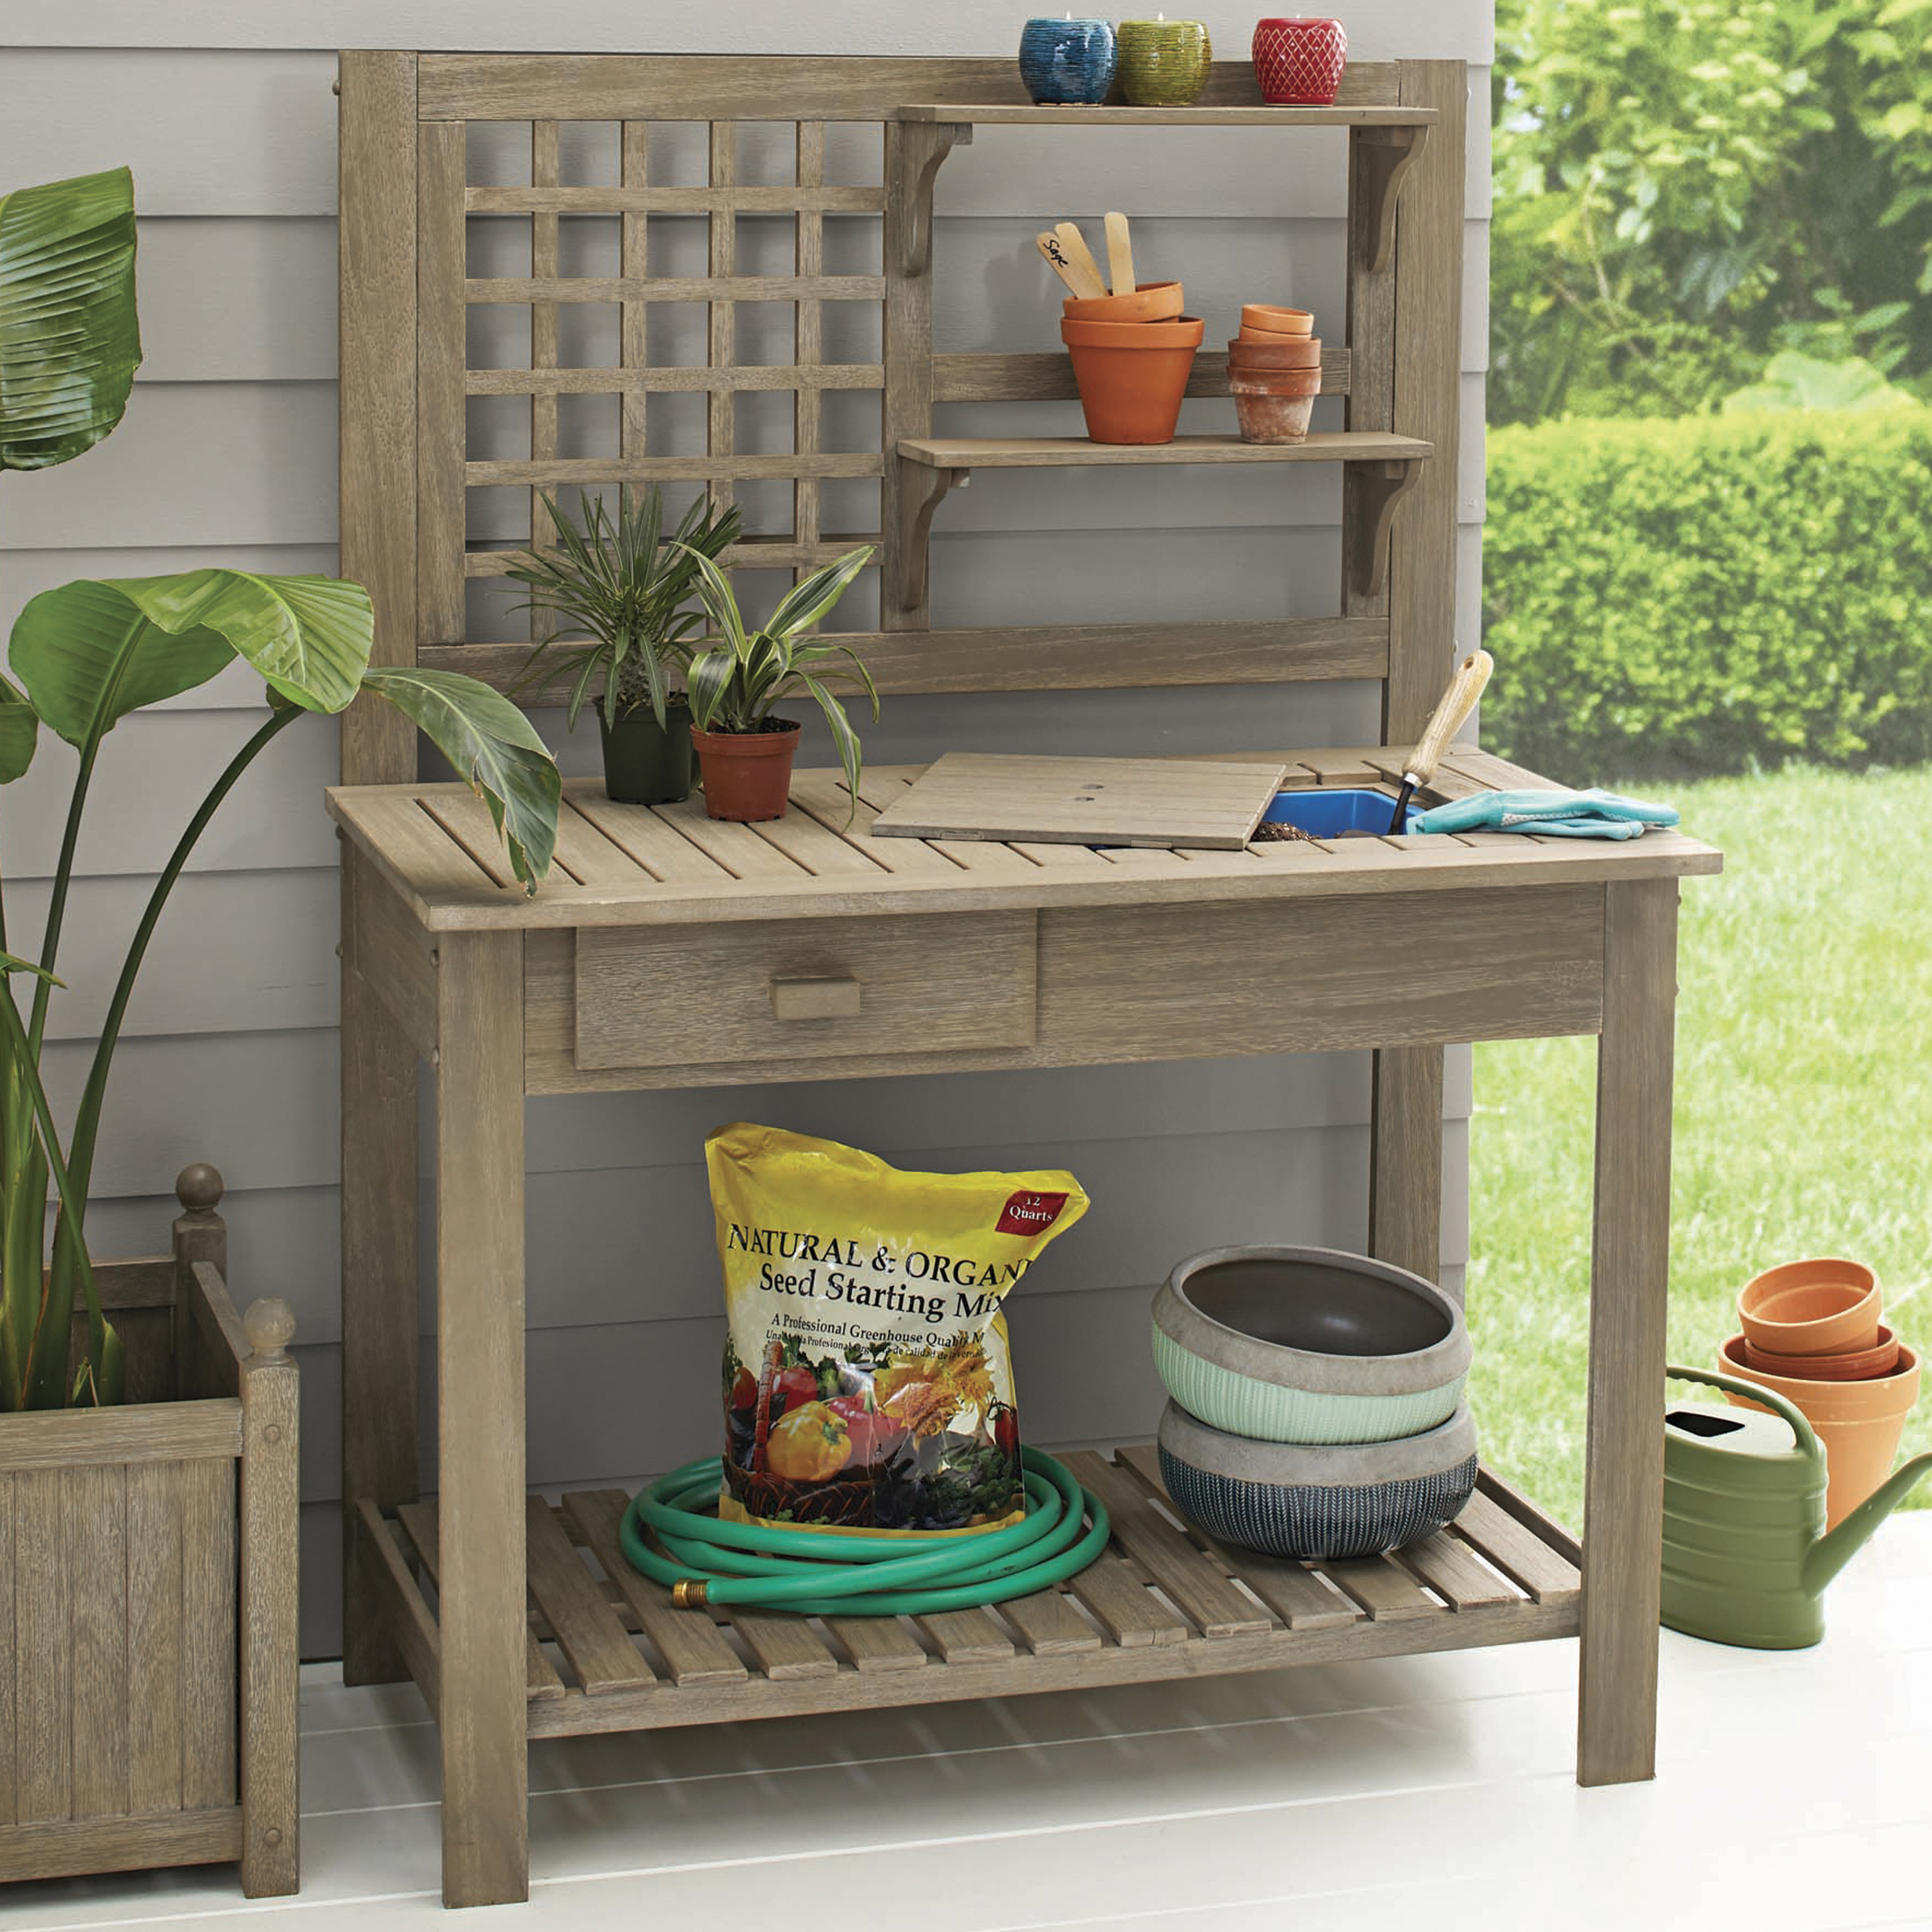 Better Homes & Gardens Gray Wood Potting Bench - image 1 of 8